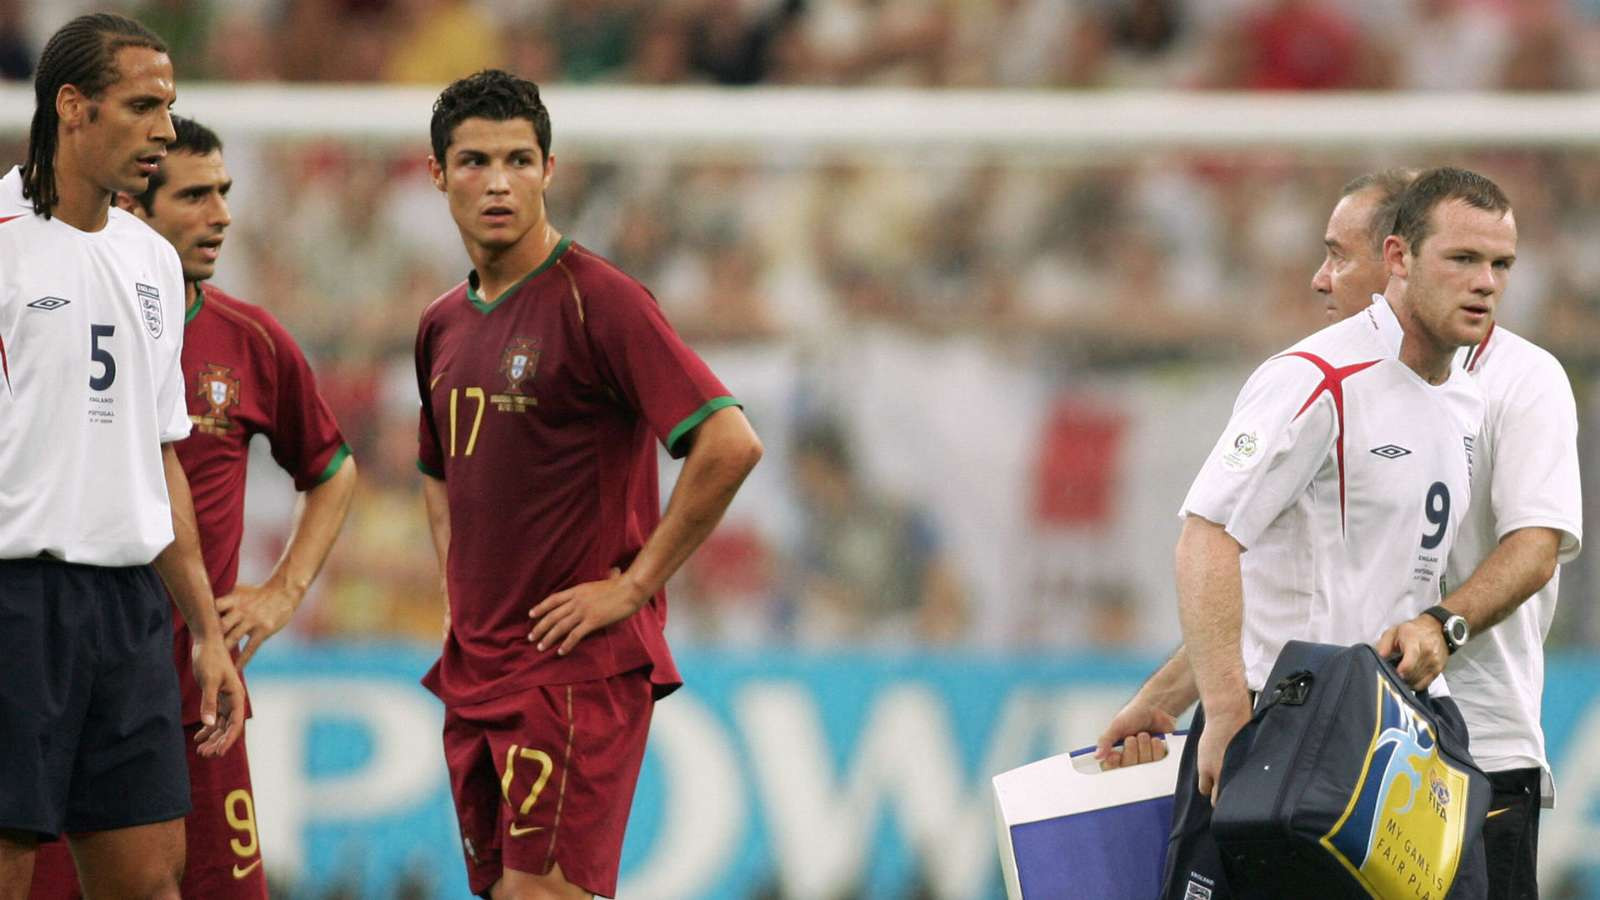 Cristiano Ronaldo's wink was nothing Wayne Rooney opens up on feeling of his career